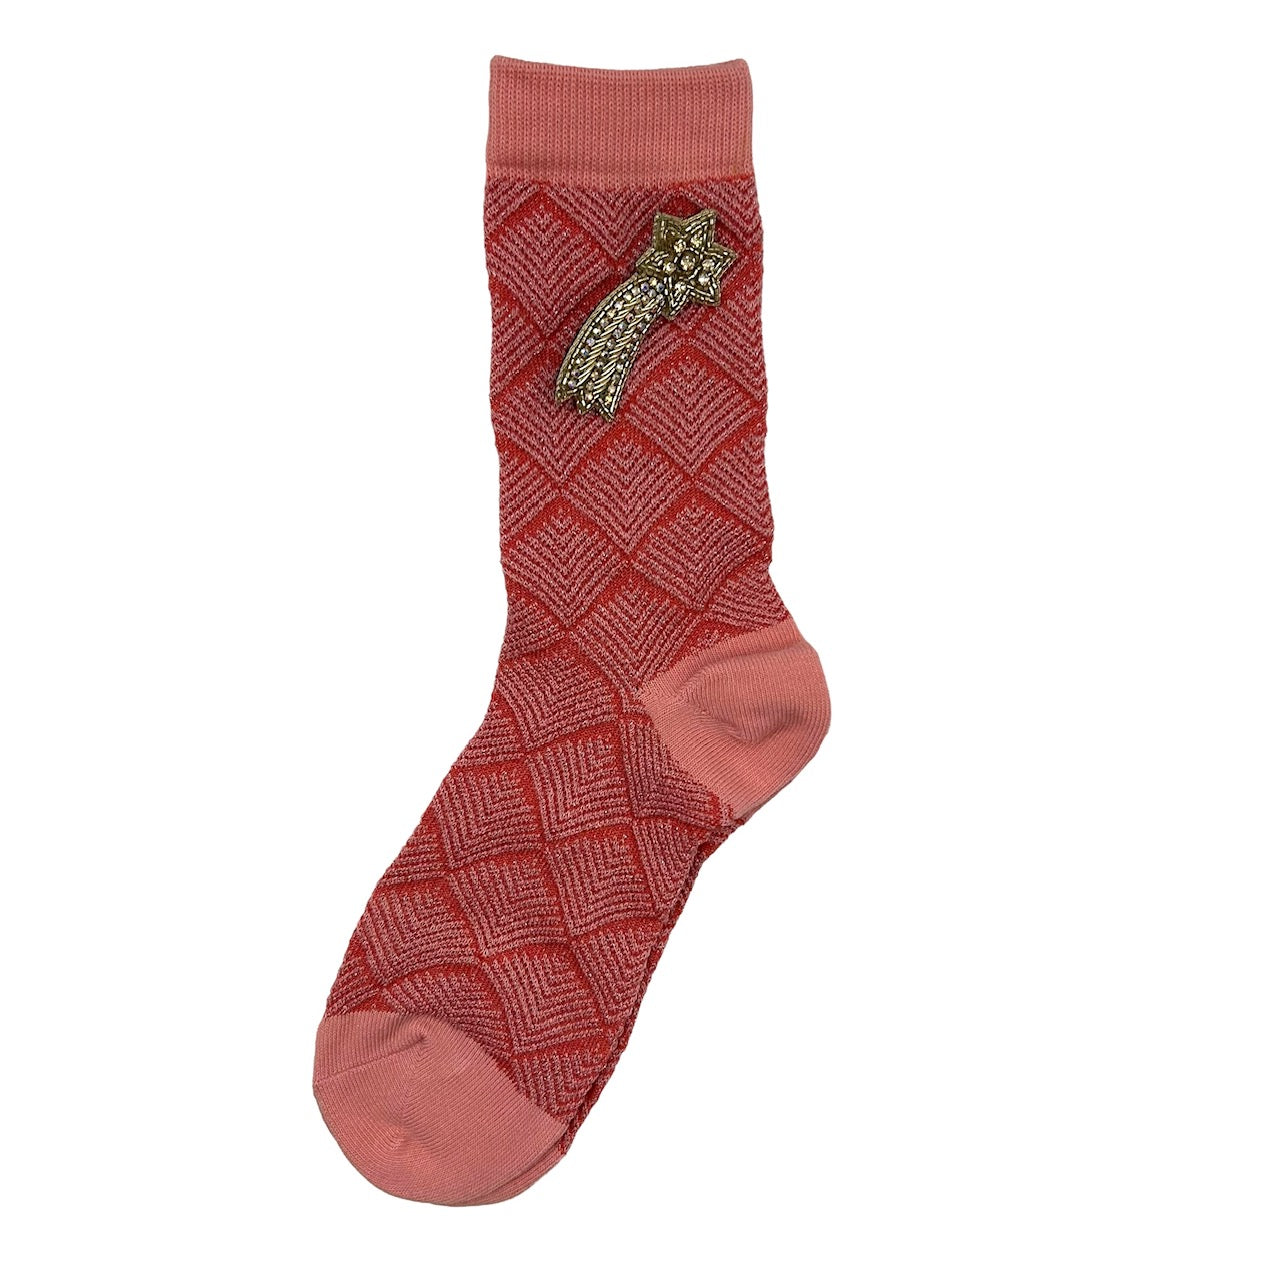 Paris socks in pink with a shooting star brooch